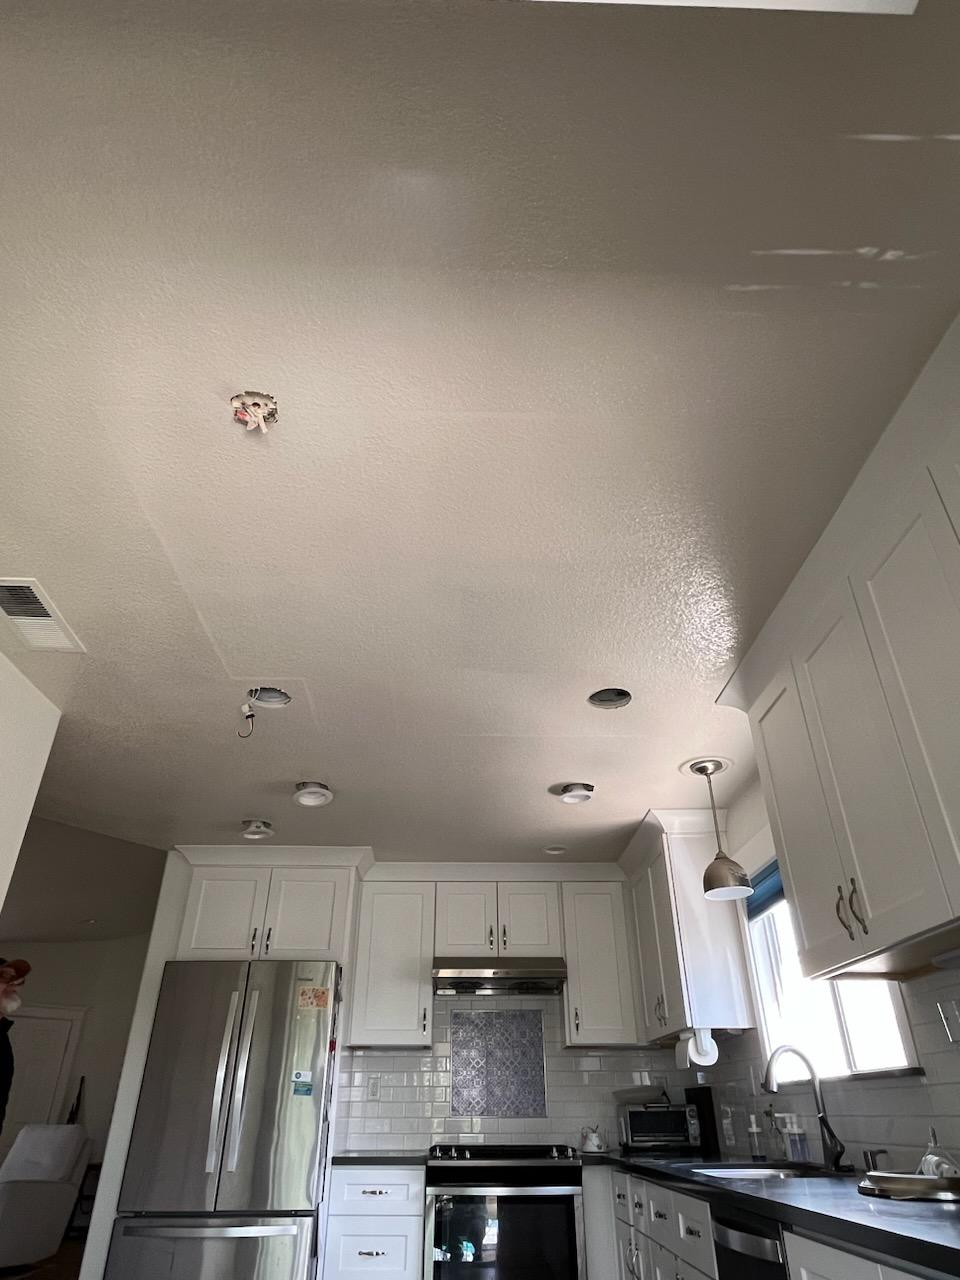 Ceiling drywall repair in kitchen after